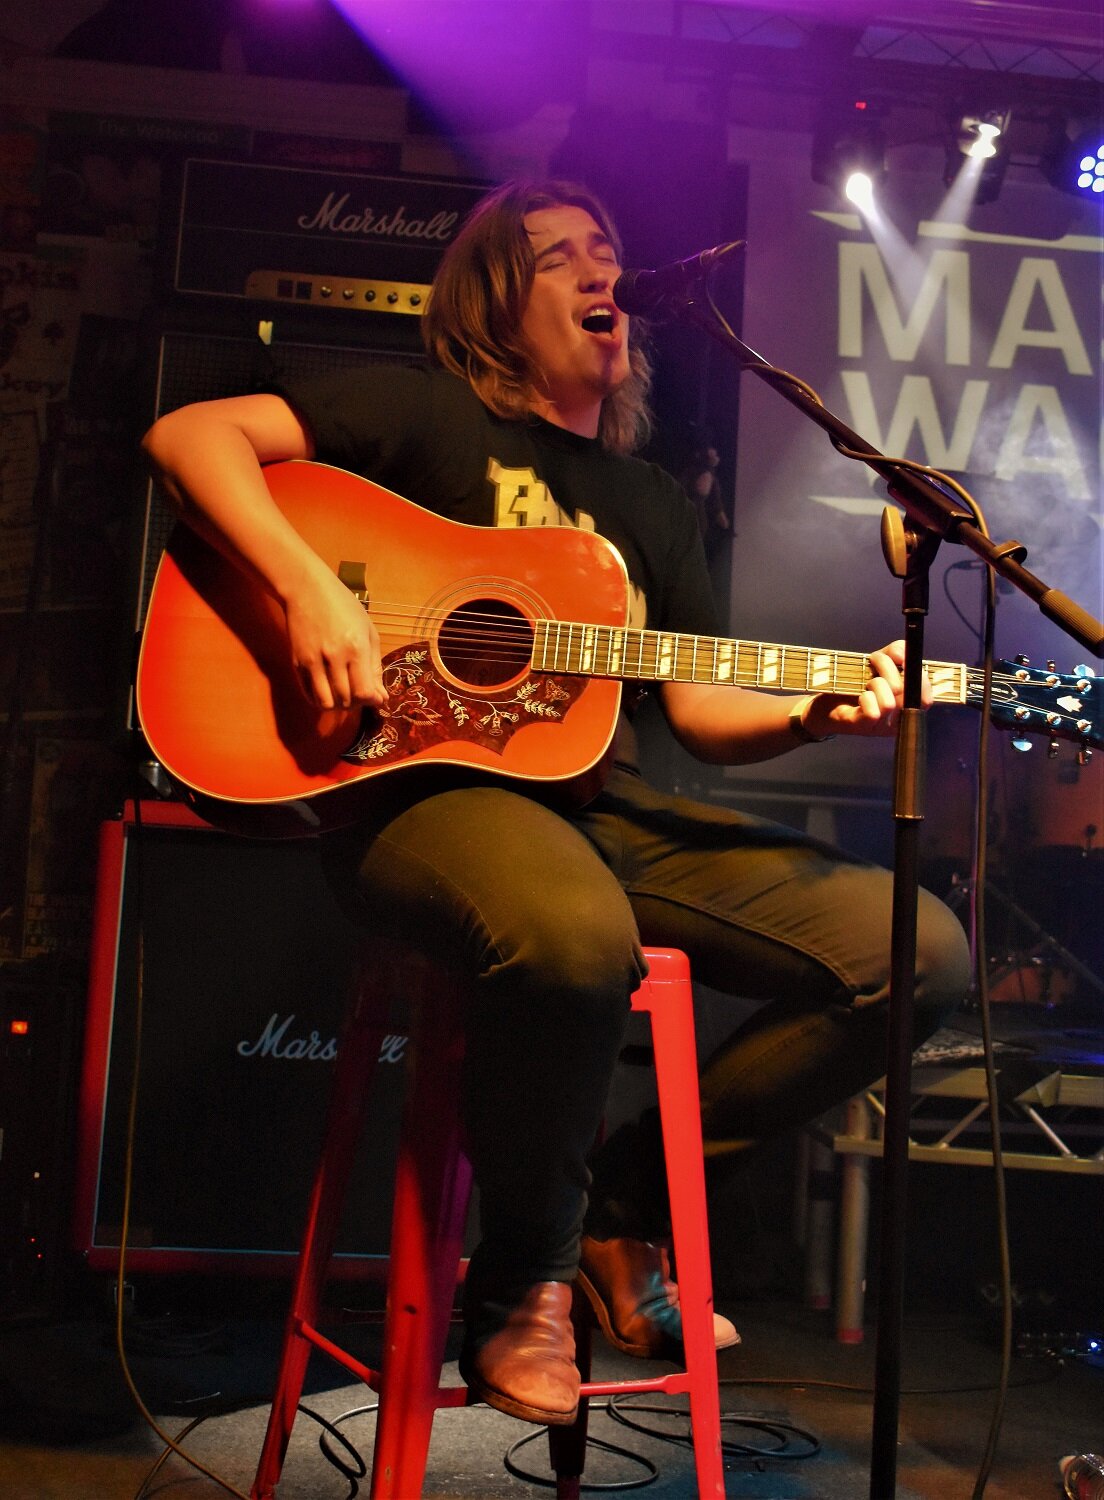 Massive Wagons at the Waterloo Music Bar in Blackpool on October 18th 2019. Massive Weekend ©Jo Crosby